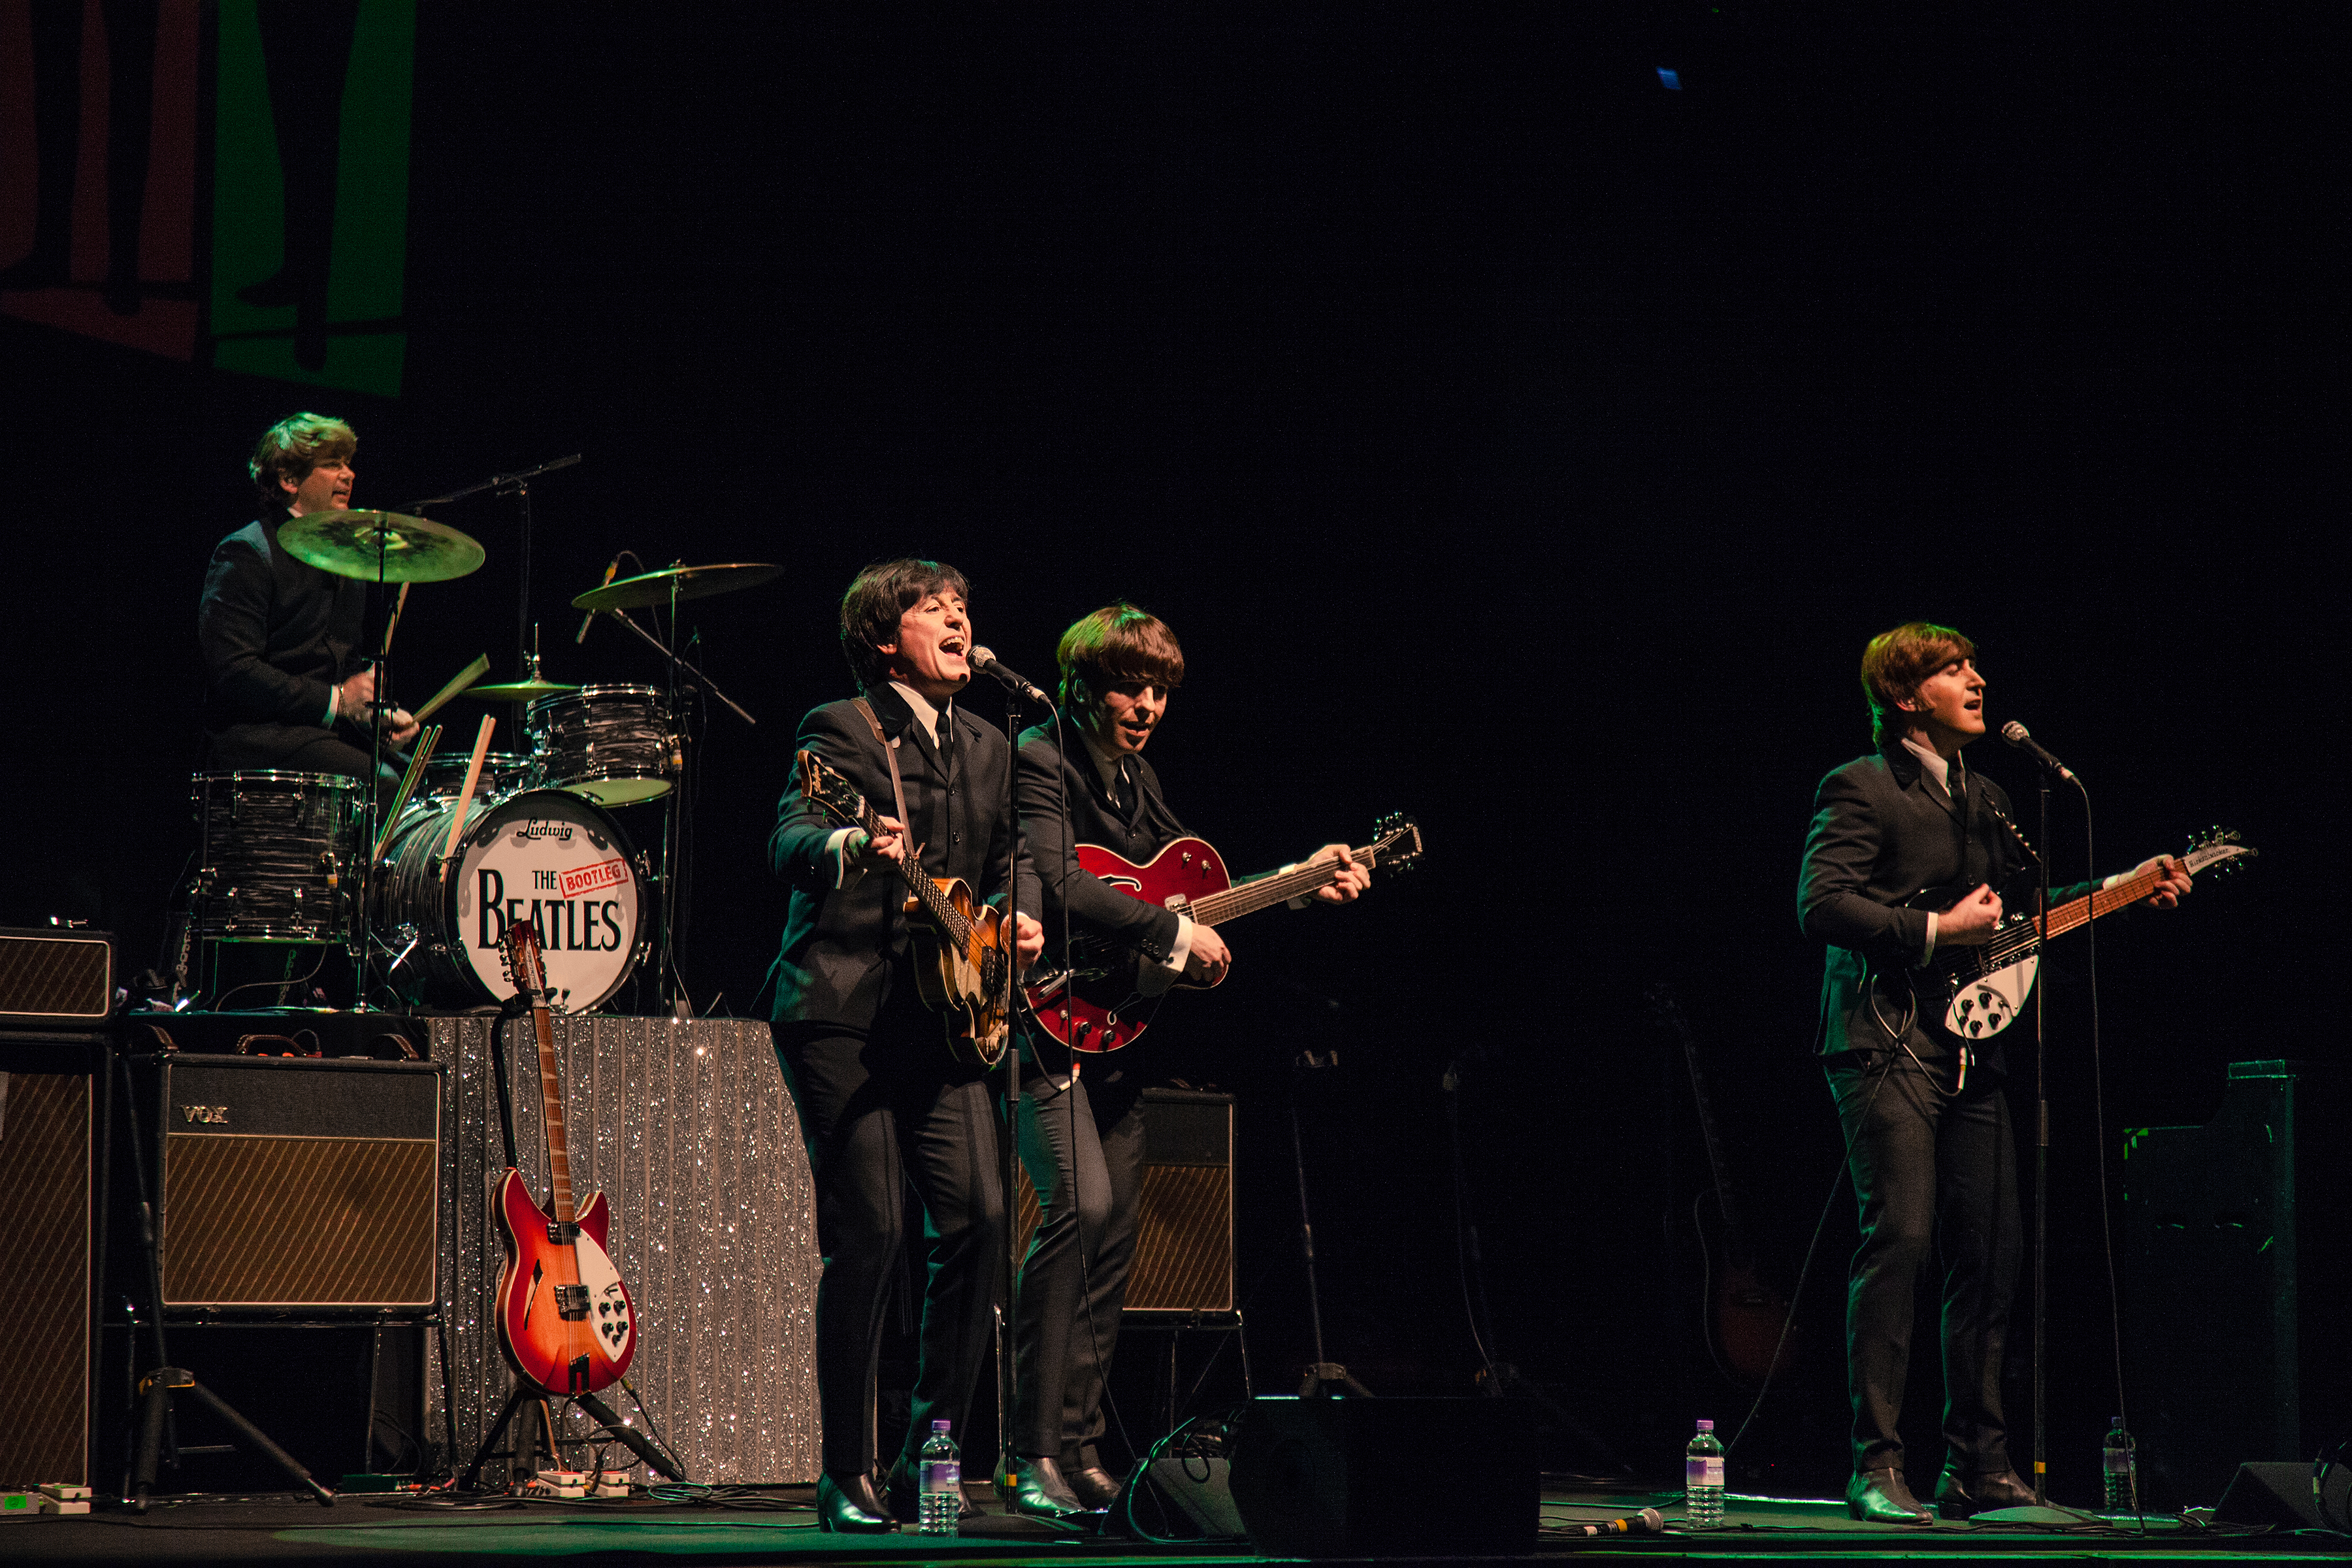 The Bootleg Beatles performing at The Victoria Hall, Stoke-on-Trent,, UK. Saturday 8th April 2017